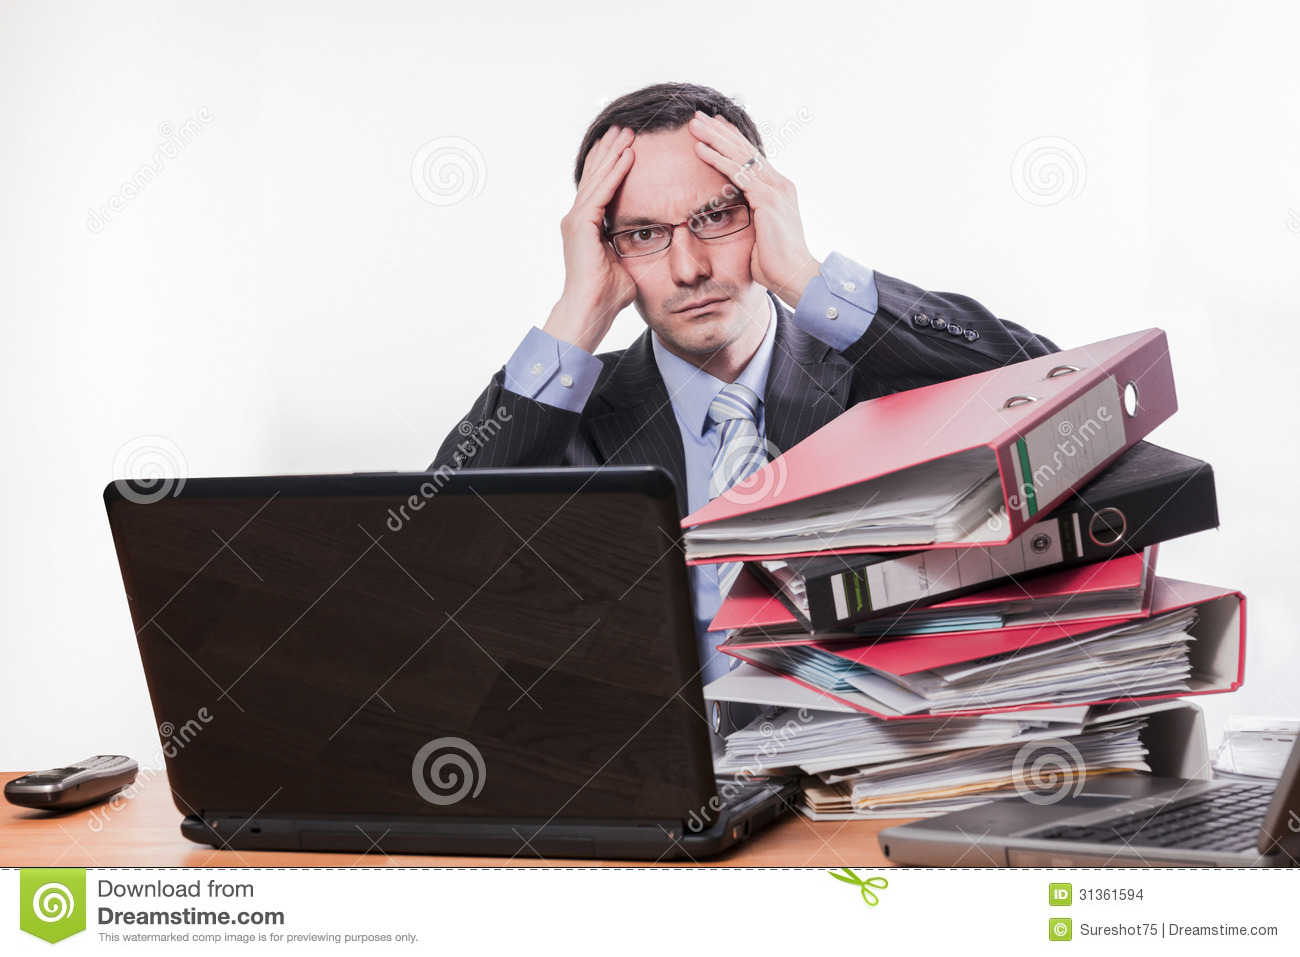 Too Much Work Headache Stock Images   Image  31361594